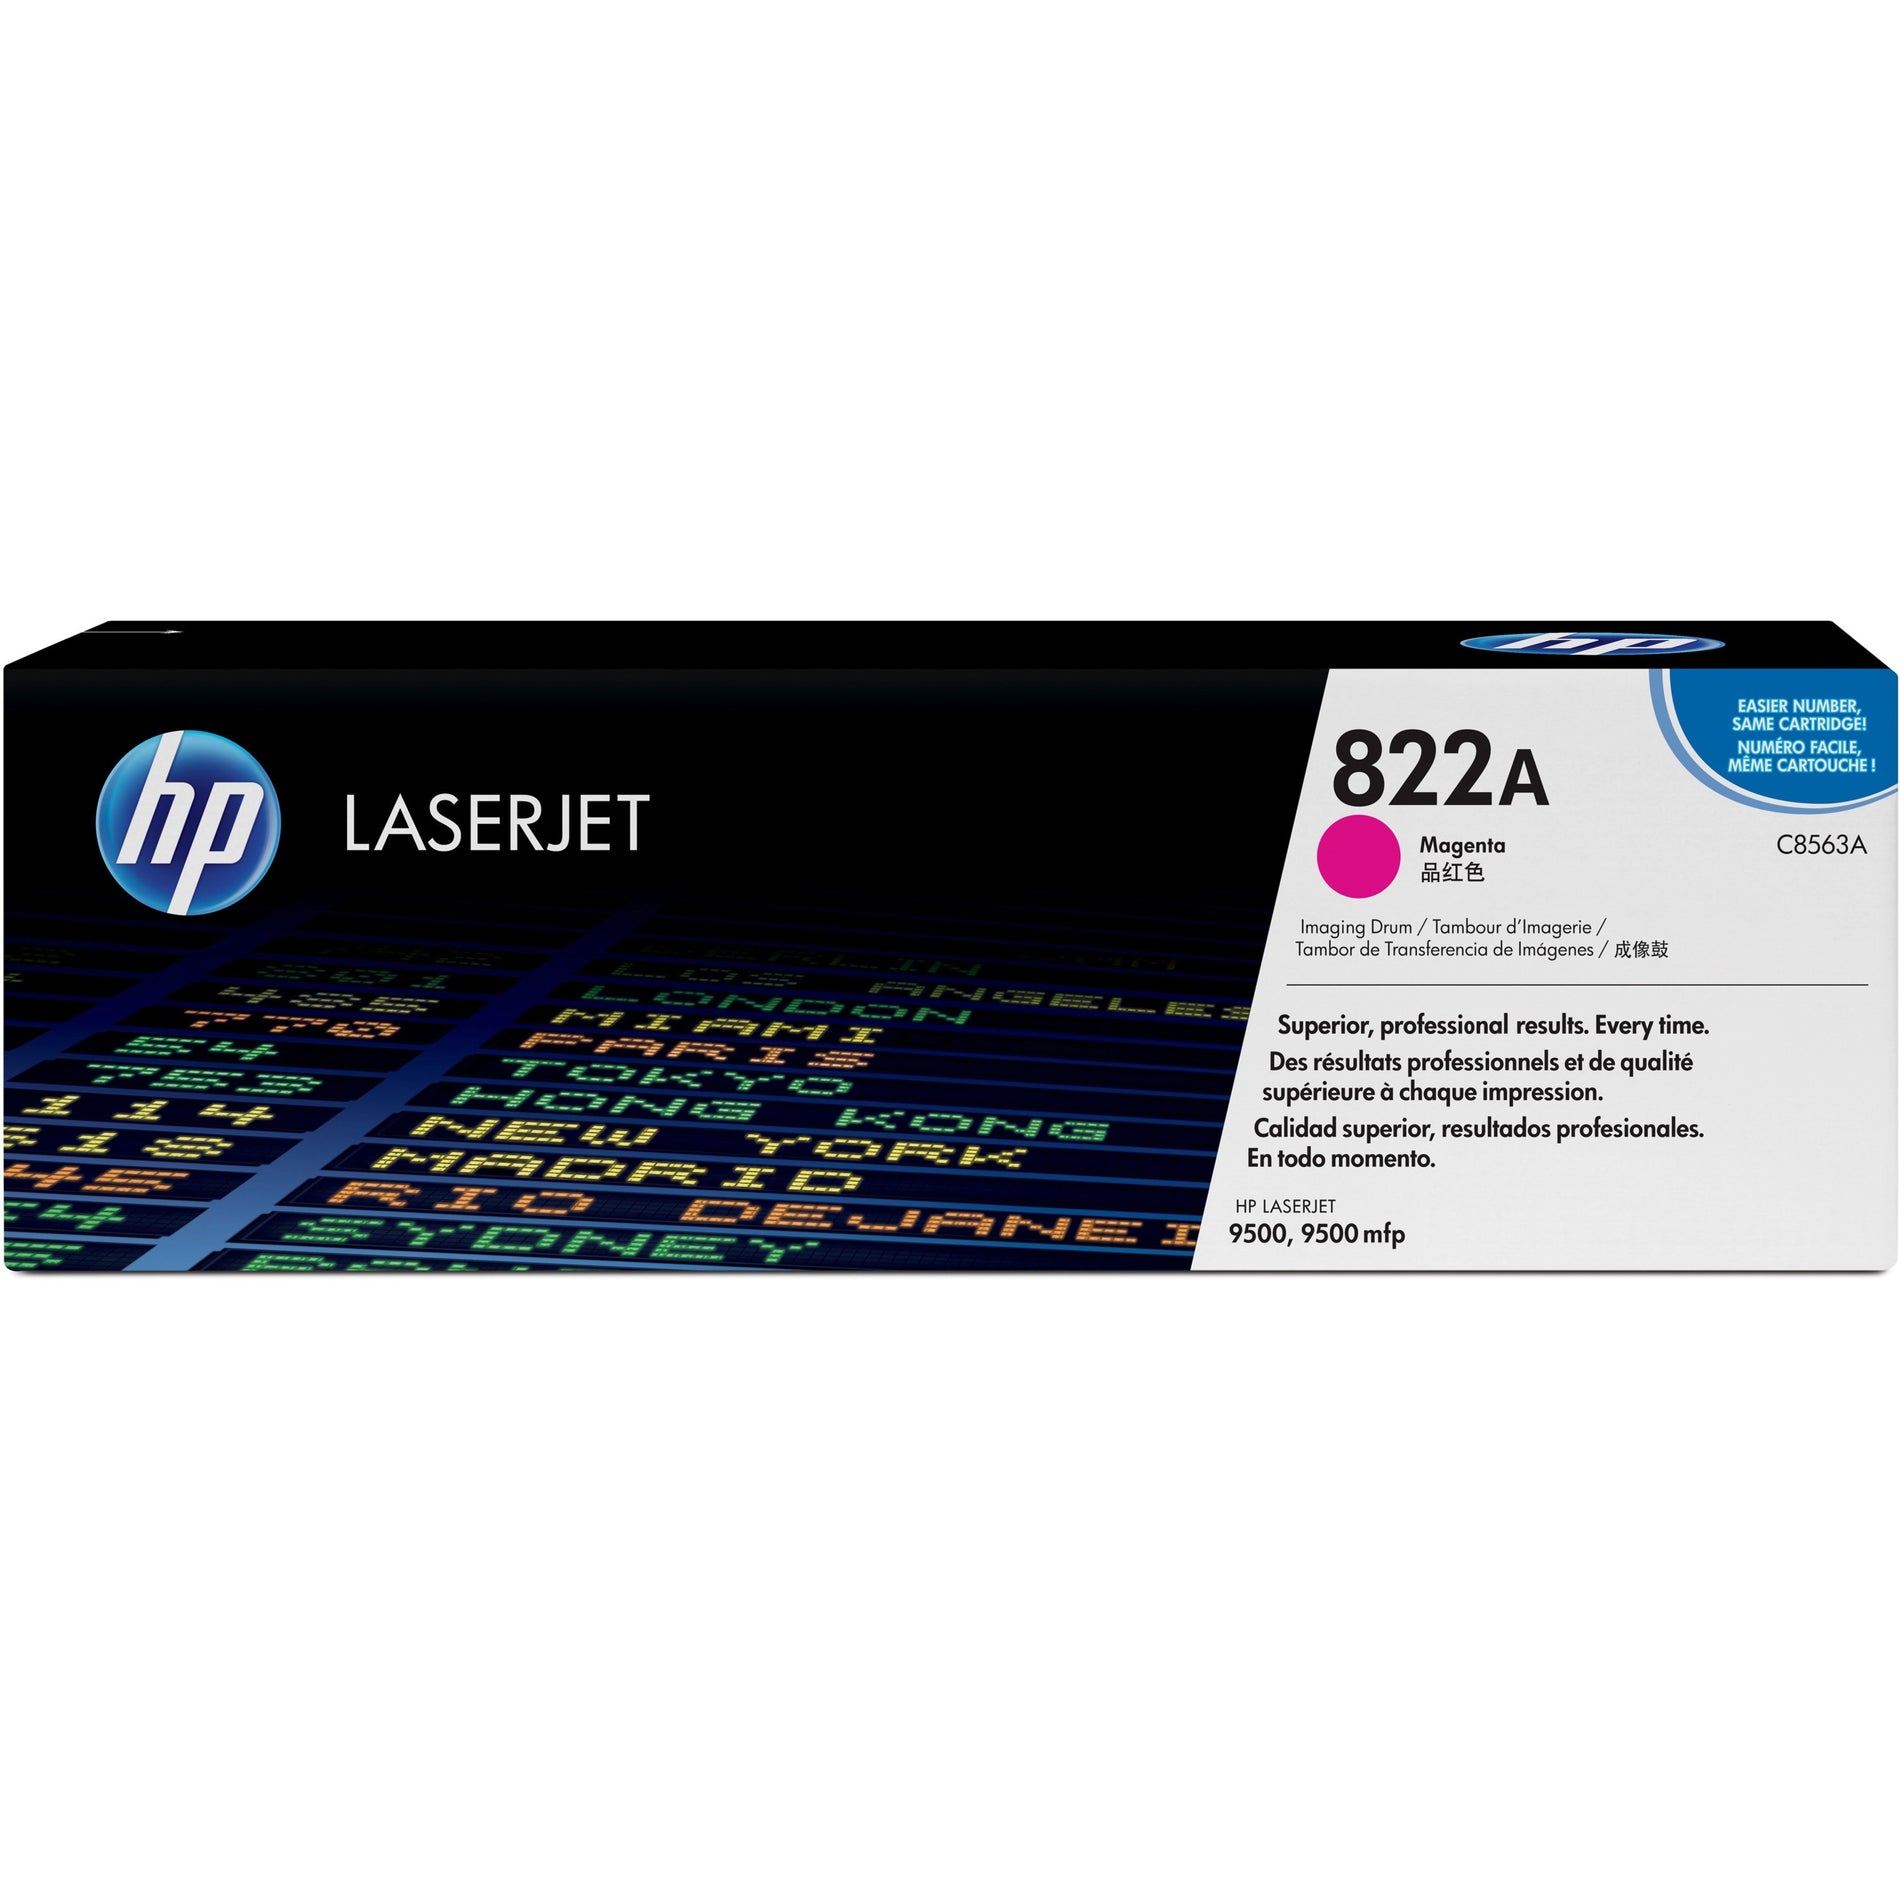 HP C8563A 822A Magenta Laser Image Drum, 40000 Print Yield